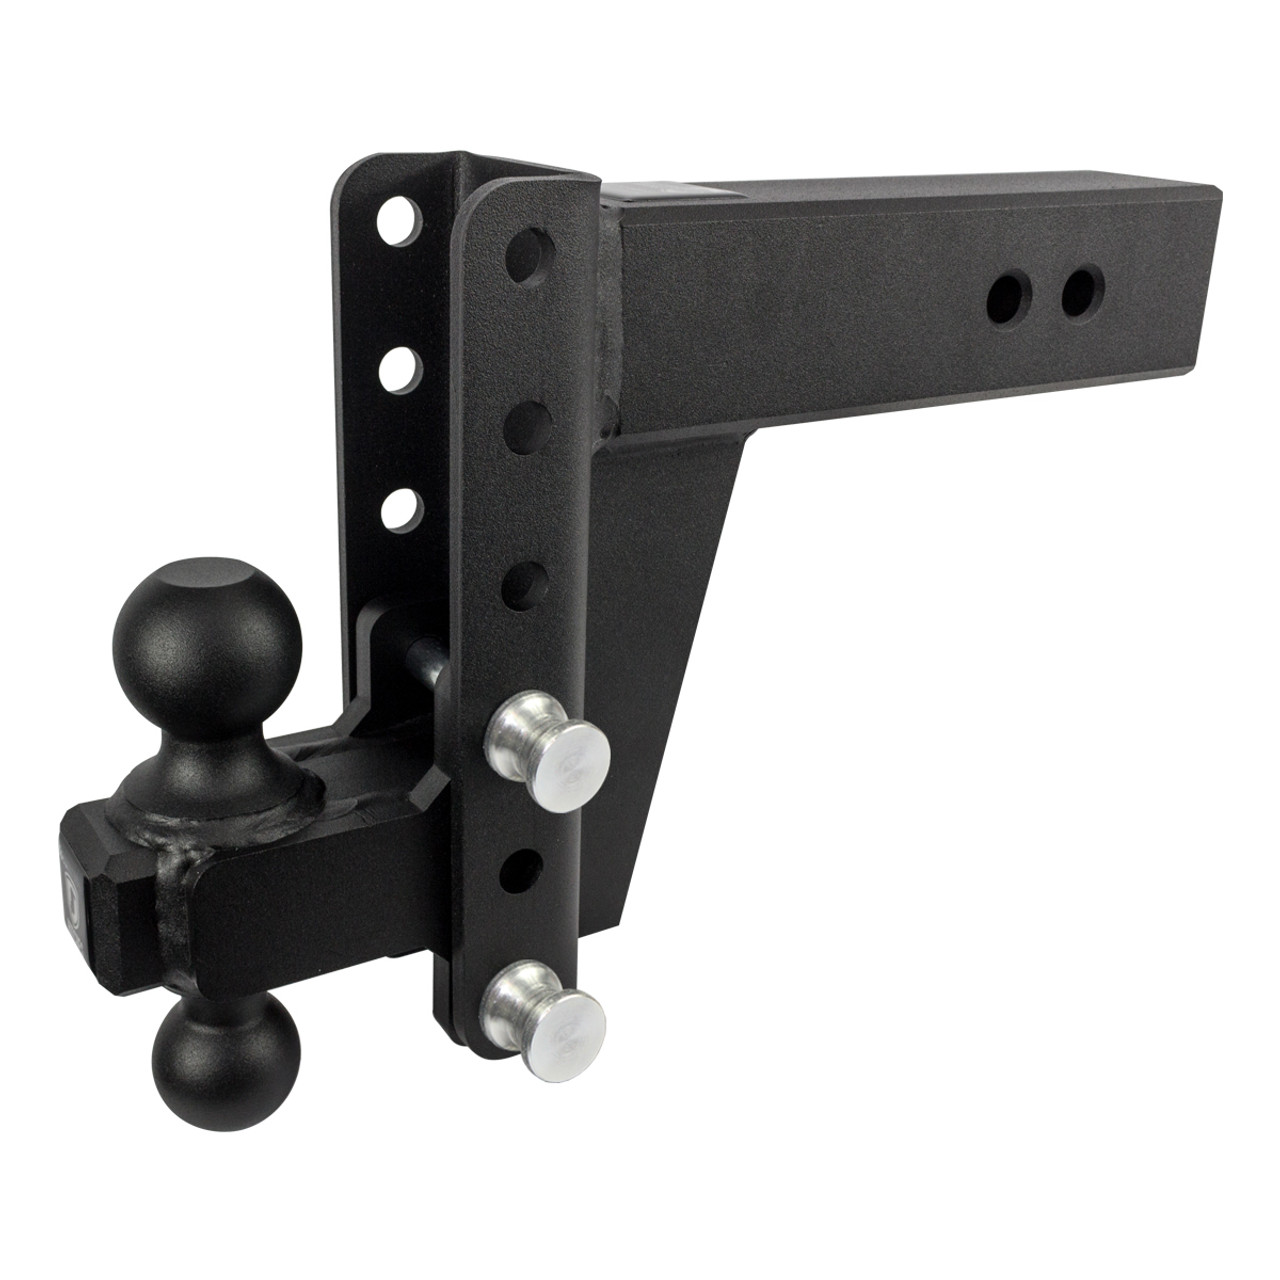 3.0” Extreme Duty 6” Drop/Rise Trailer Hitch